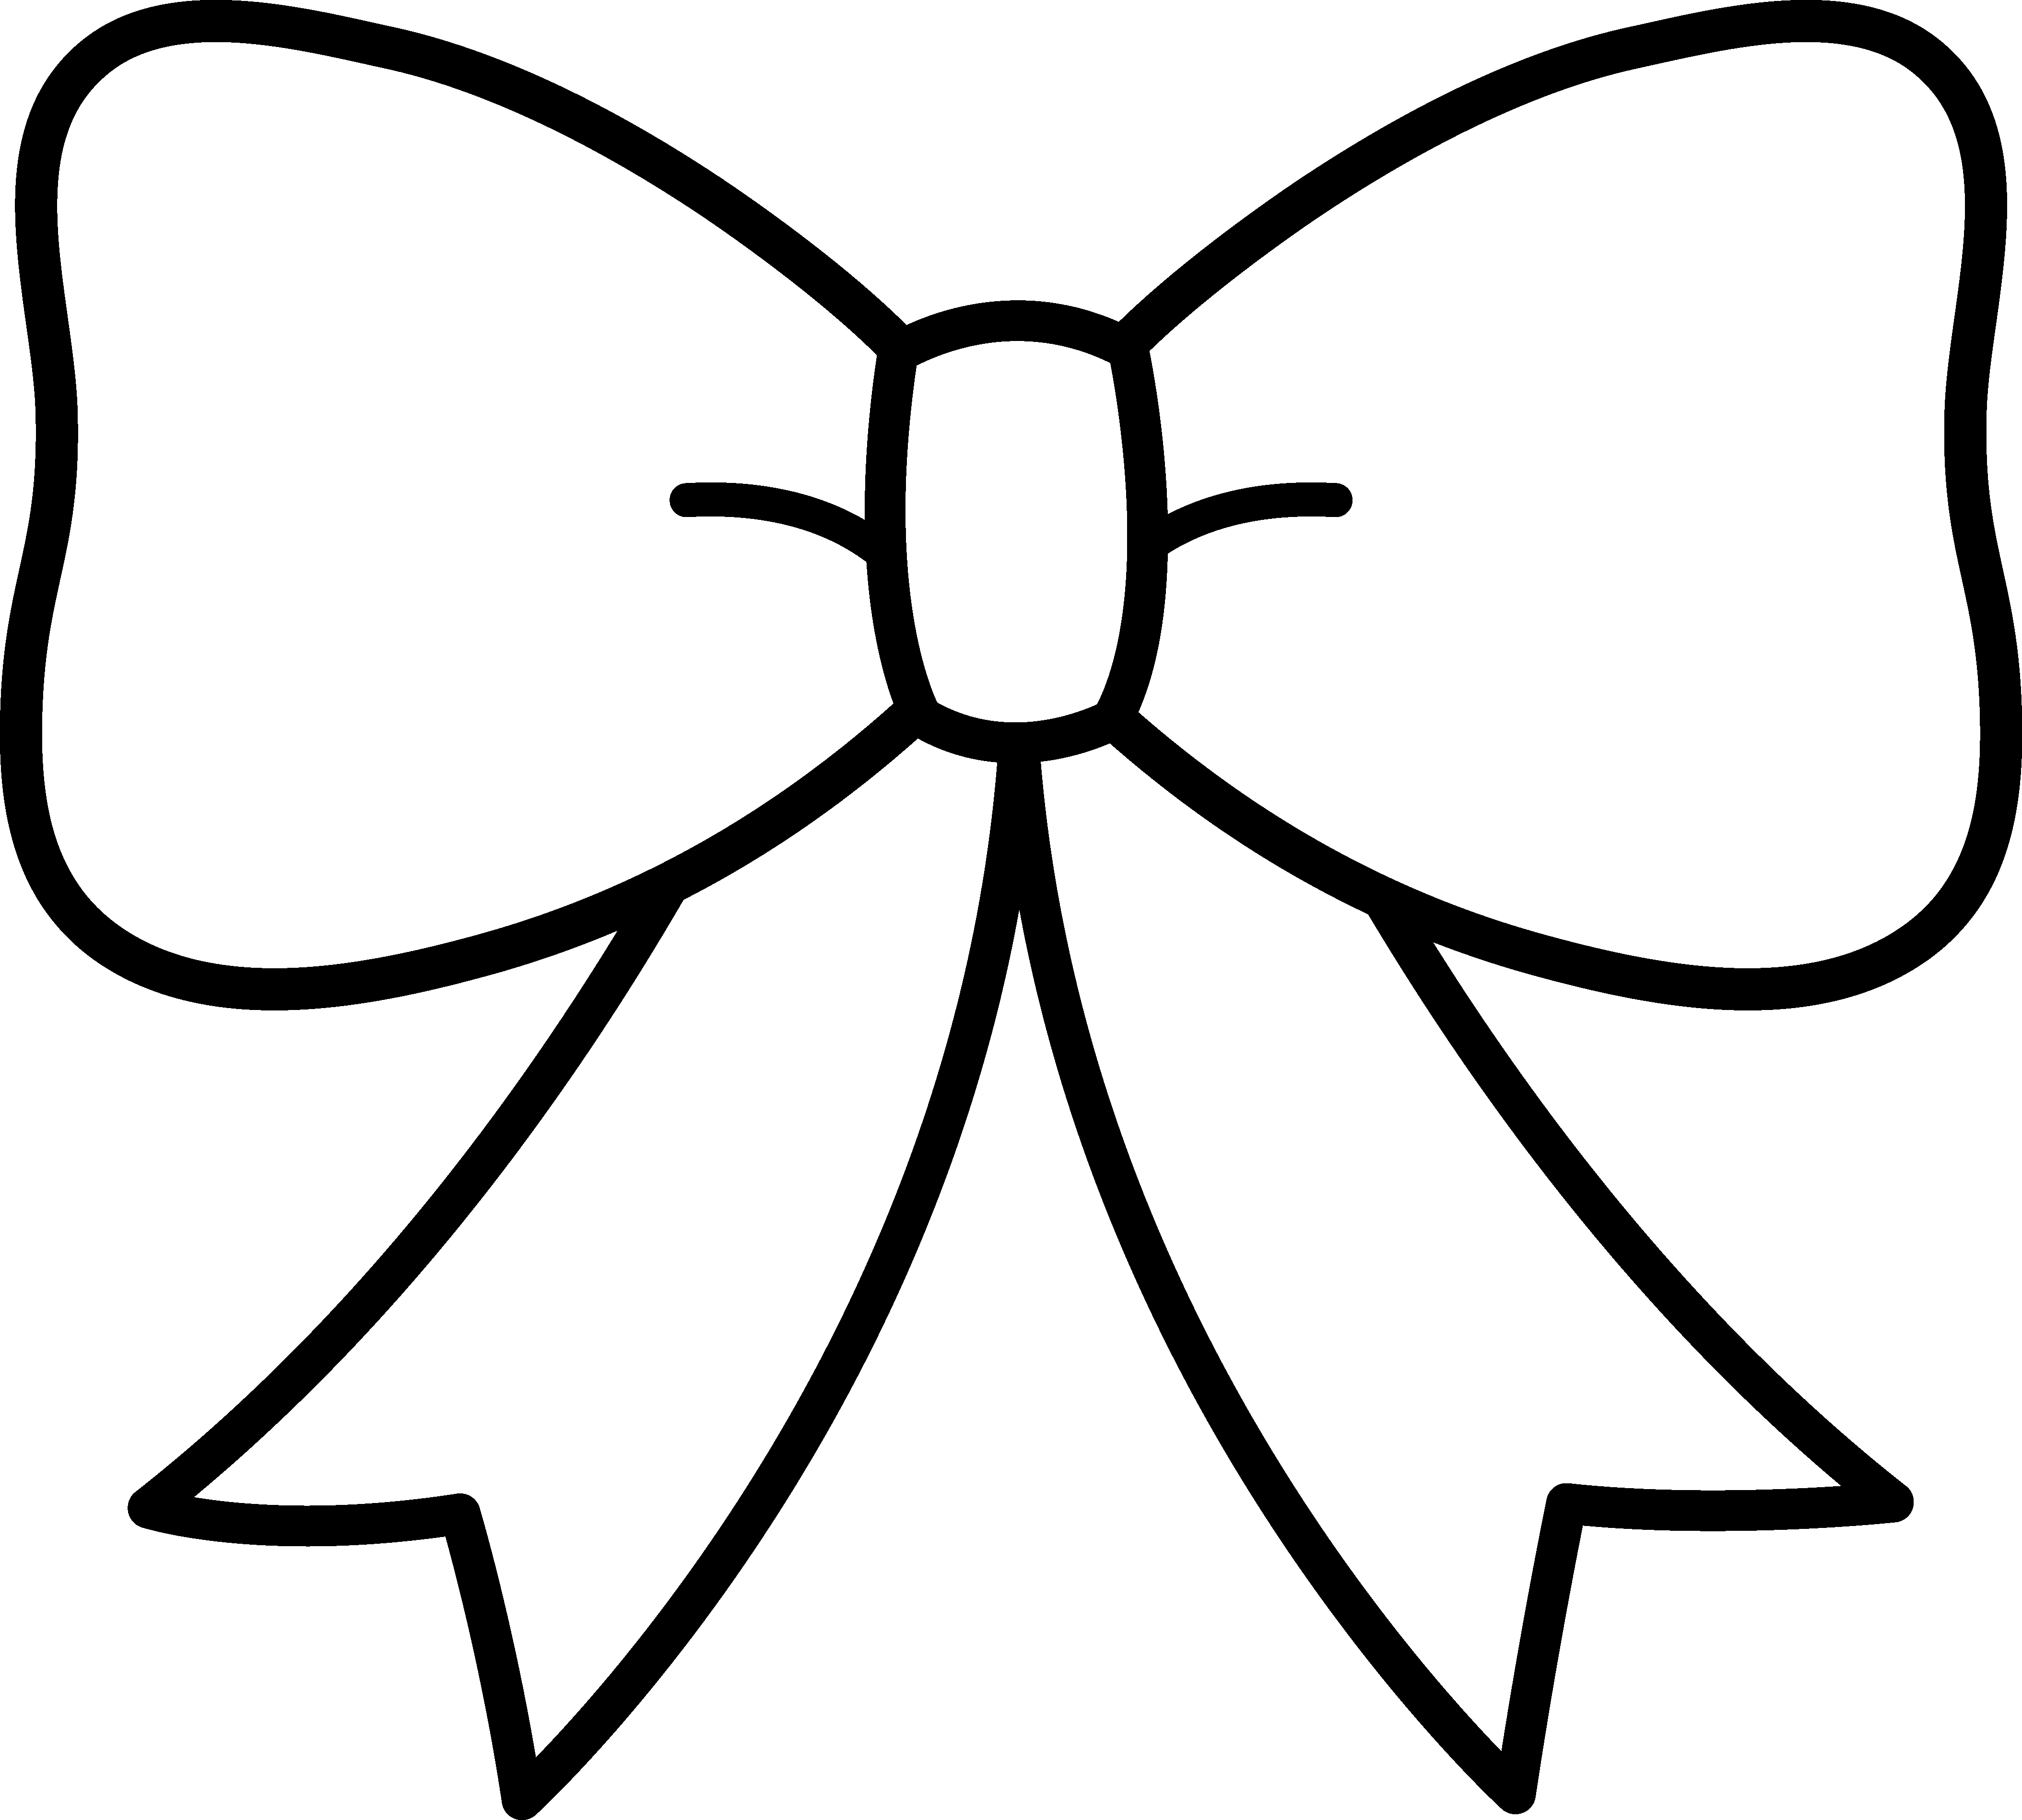 Bow black and white. Clipart kids cheerleader